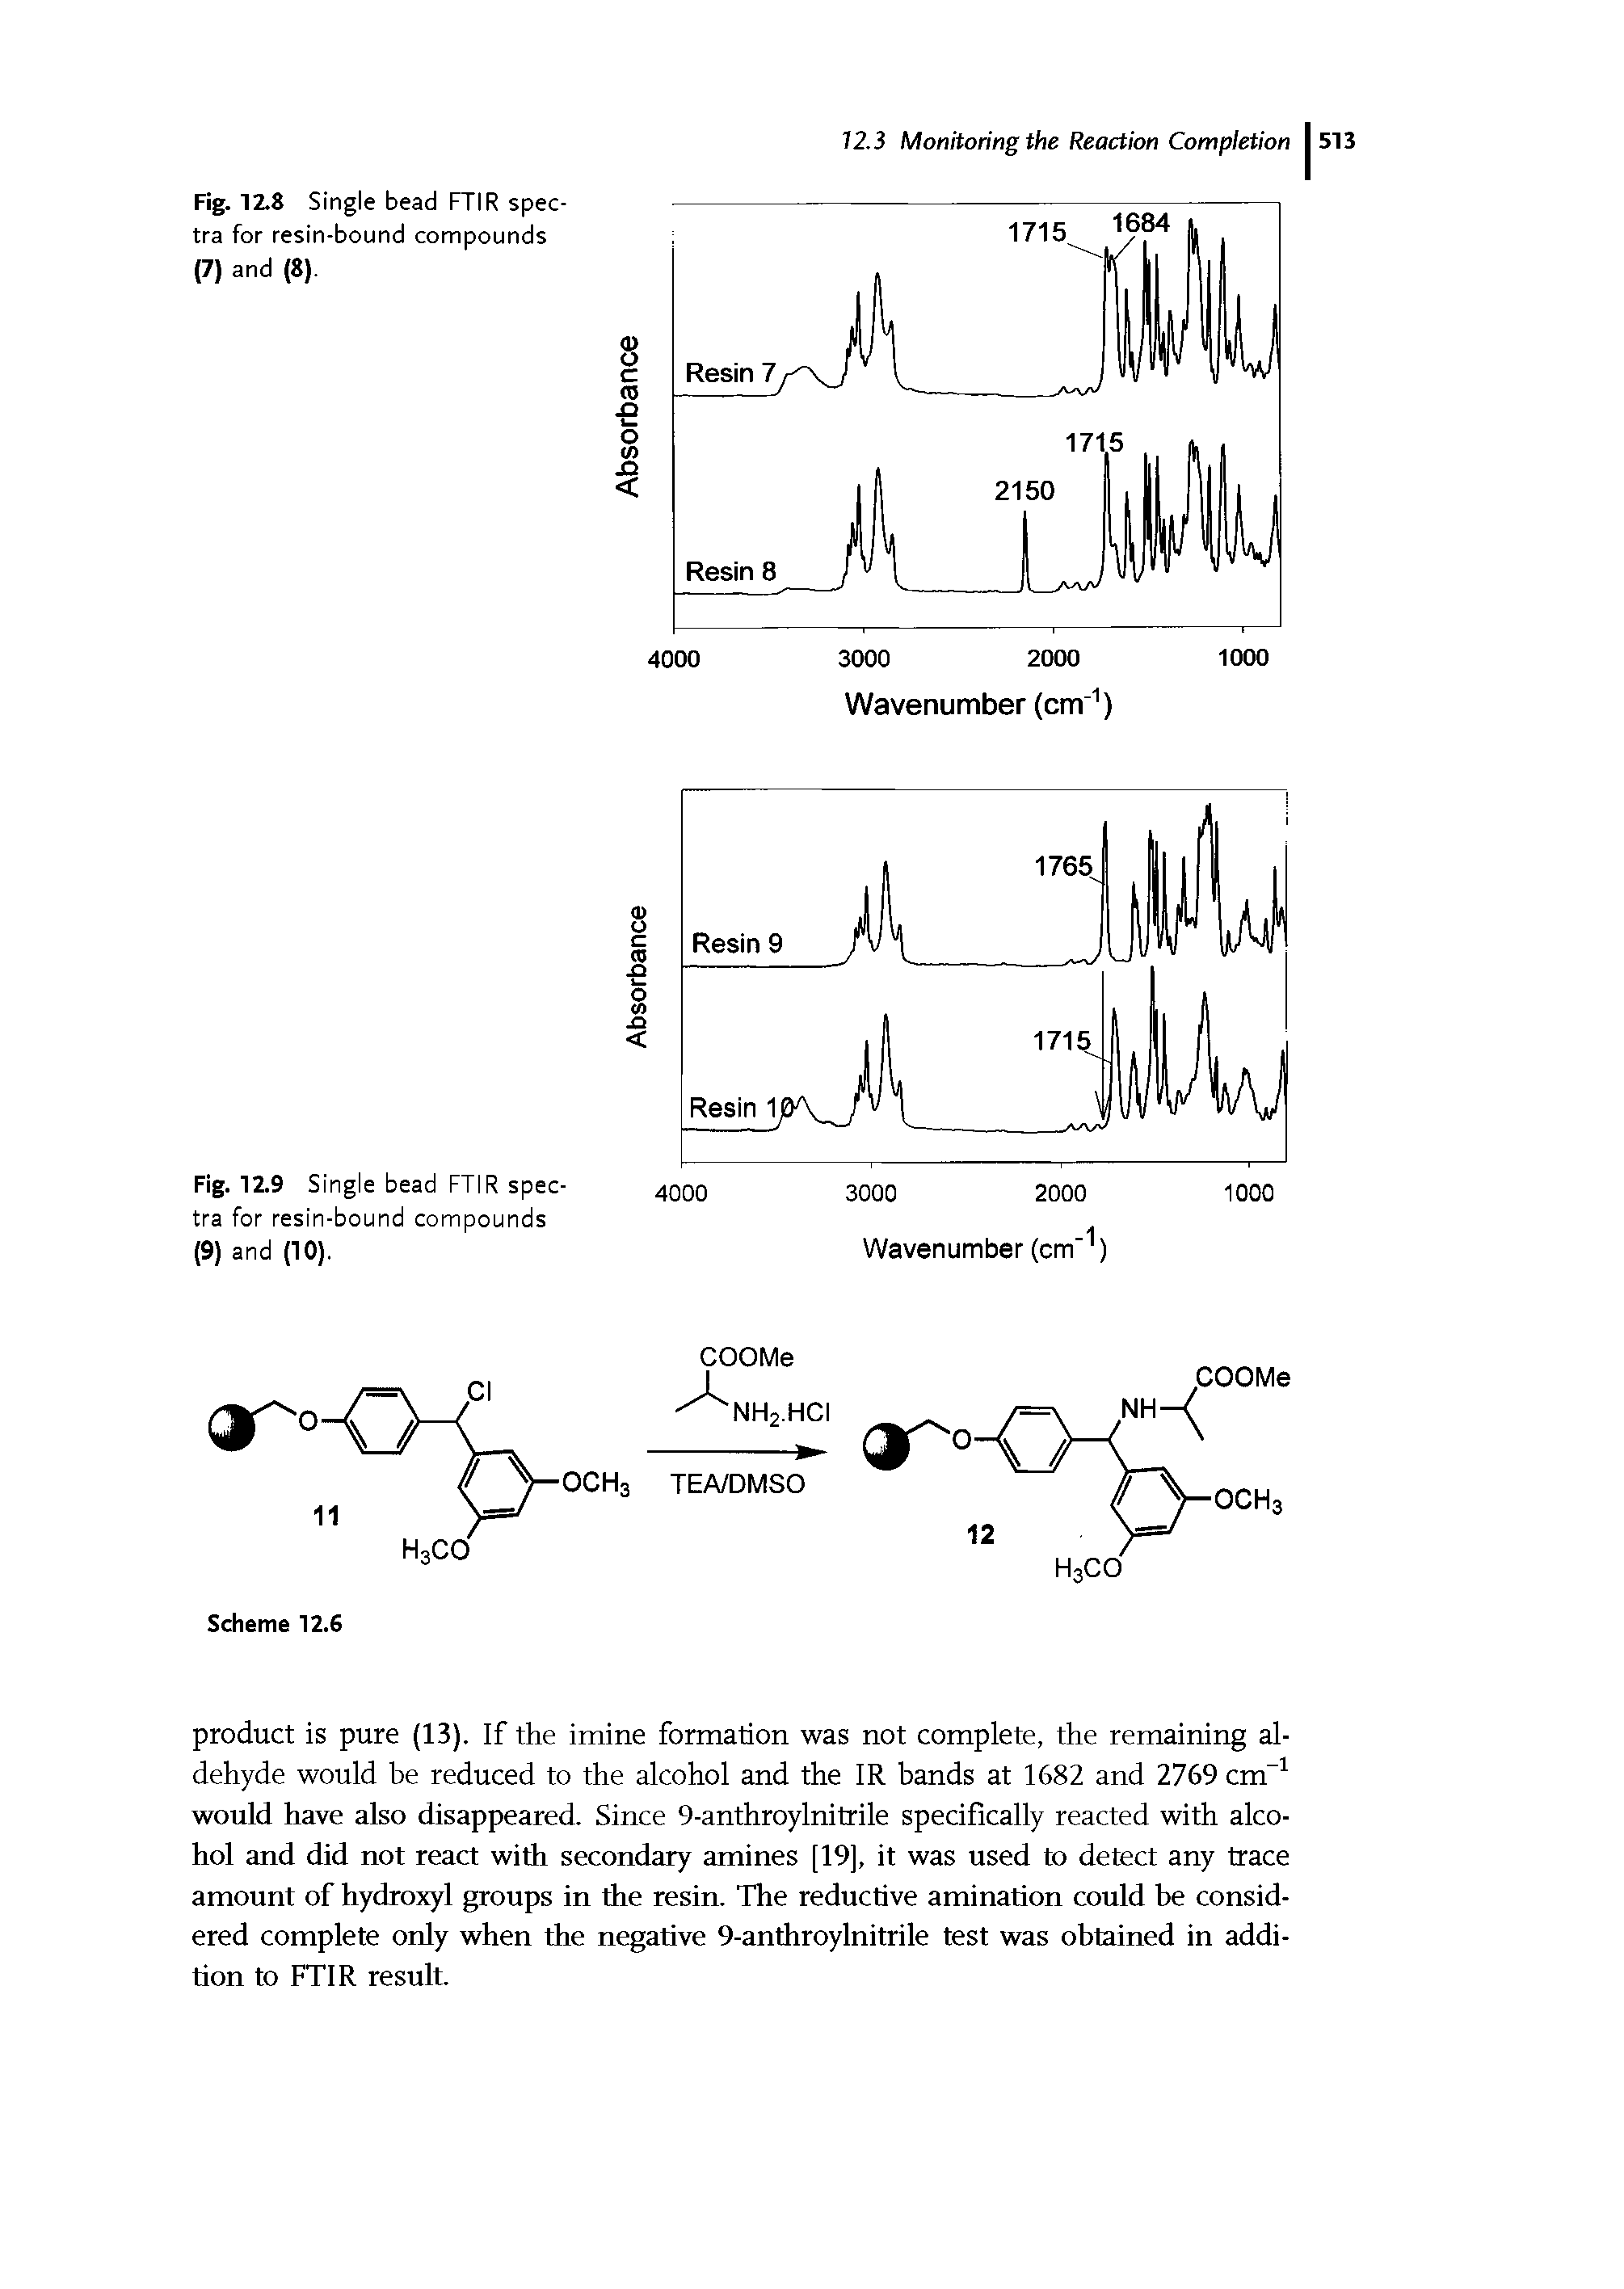 Fig. 12.8 Single bead FTIR spectra for resin-bound compounds (7) and (8).